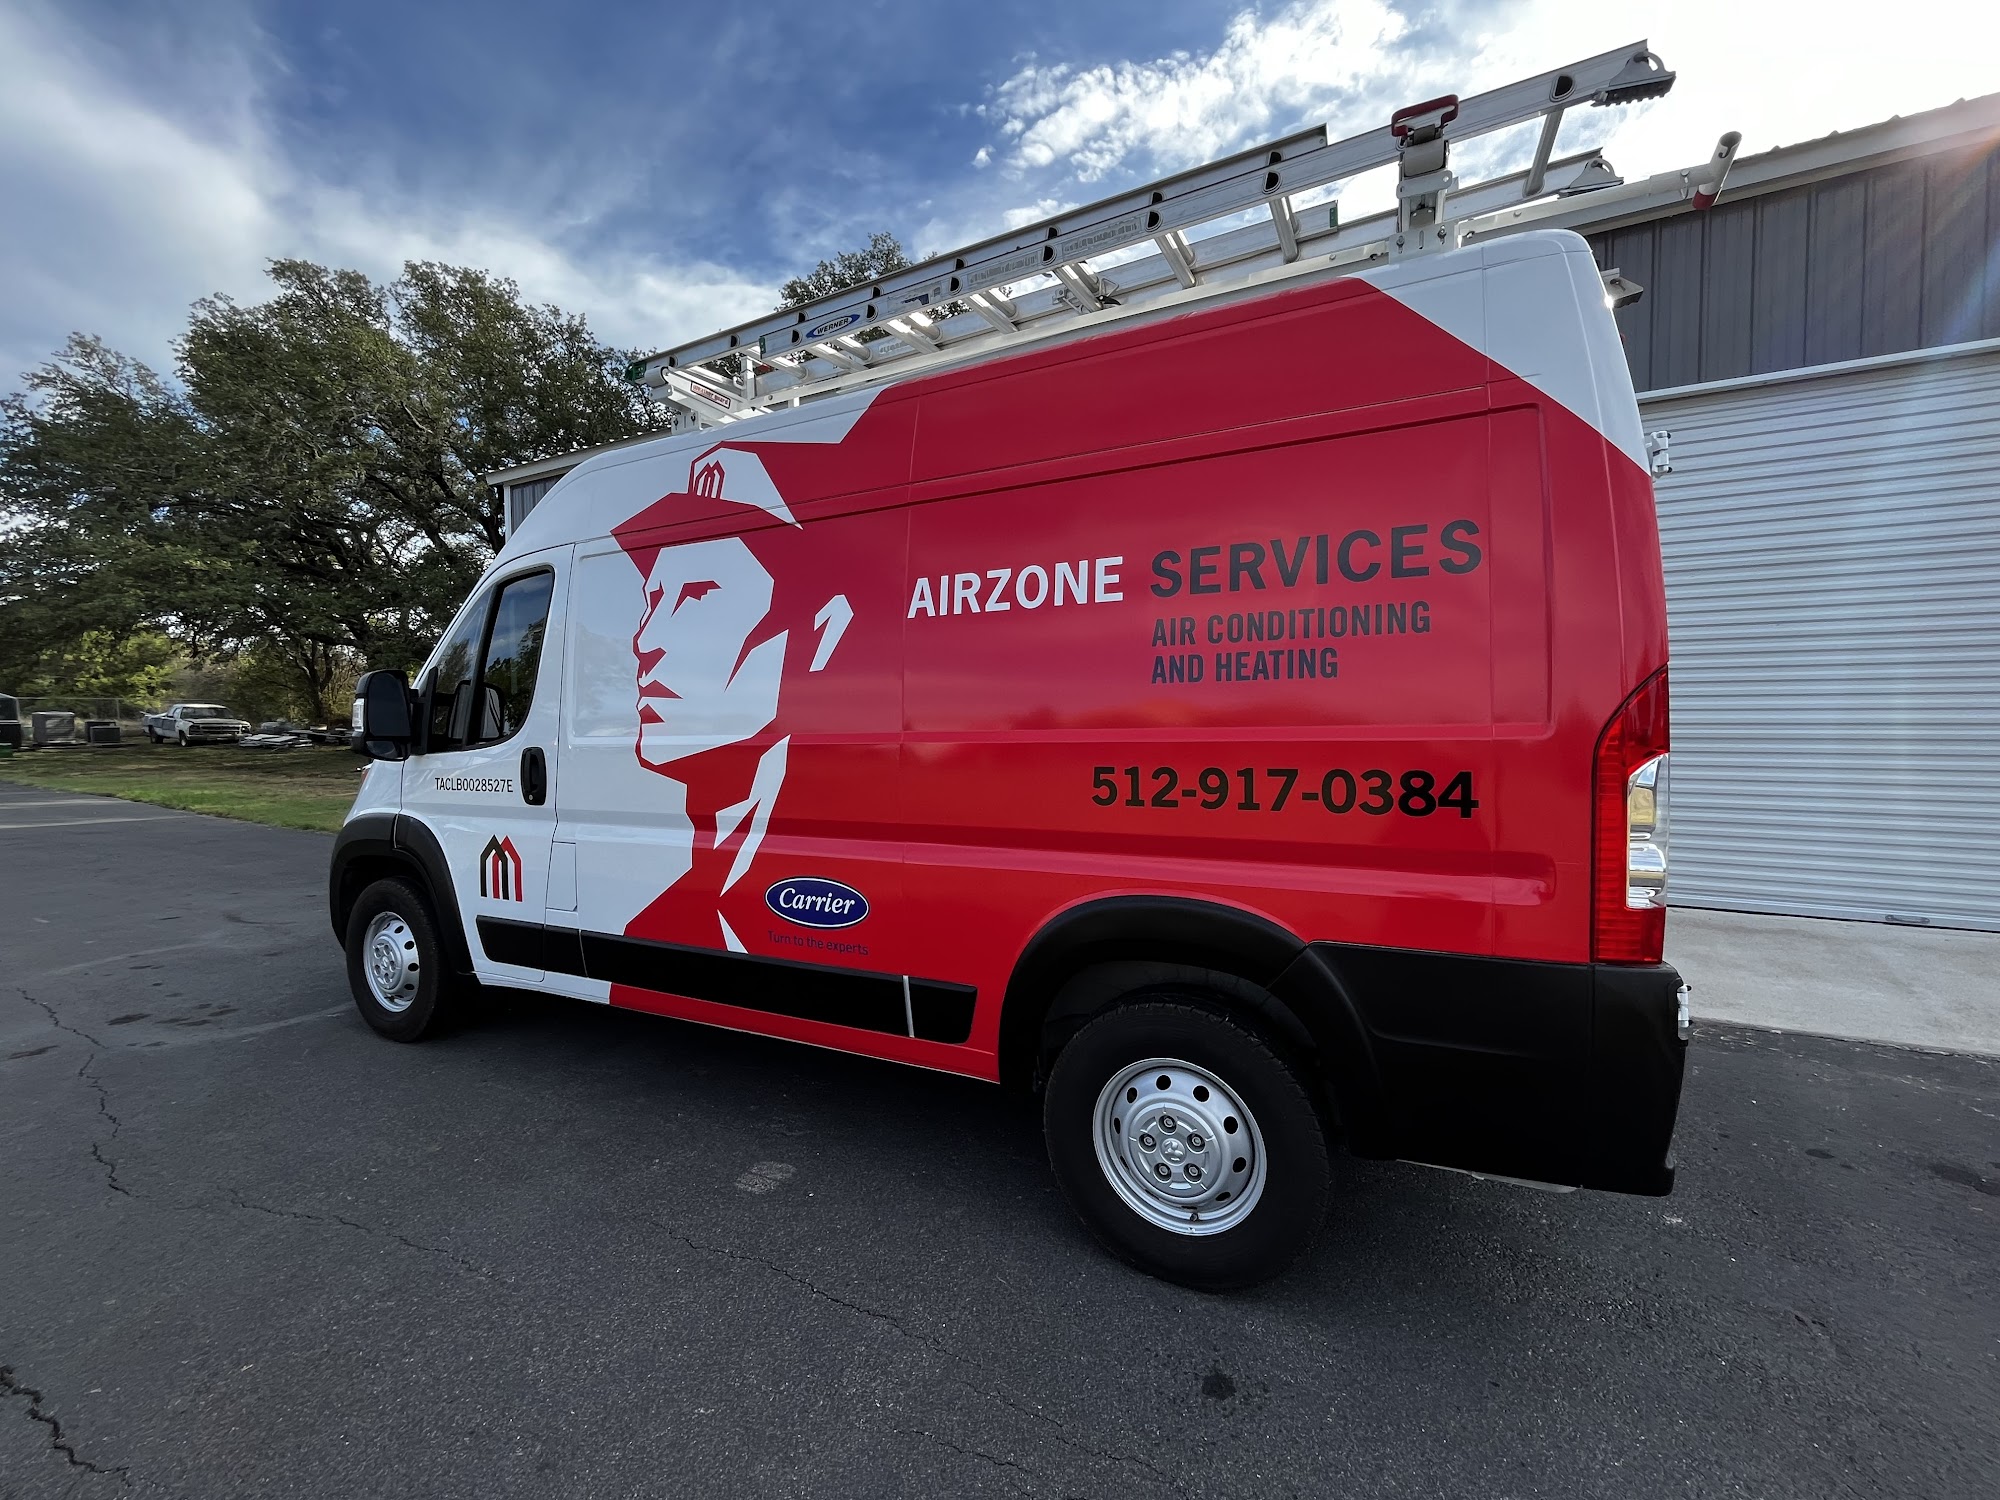 Air Zone Heating and Air Conditioning